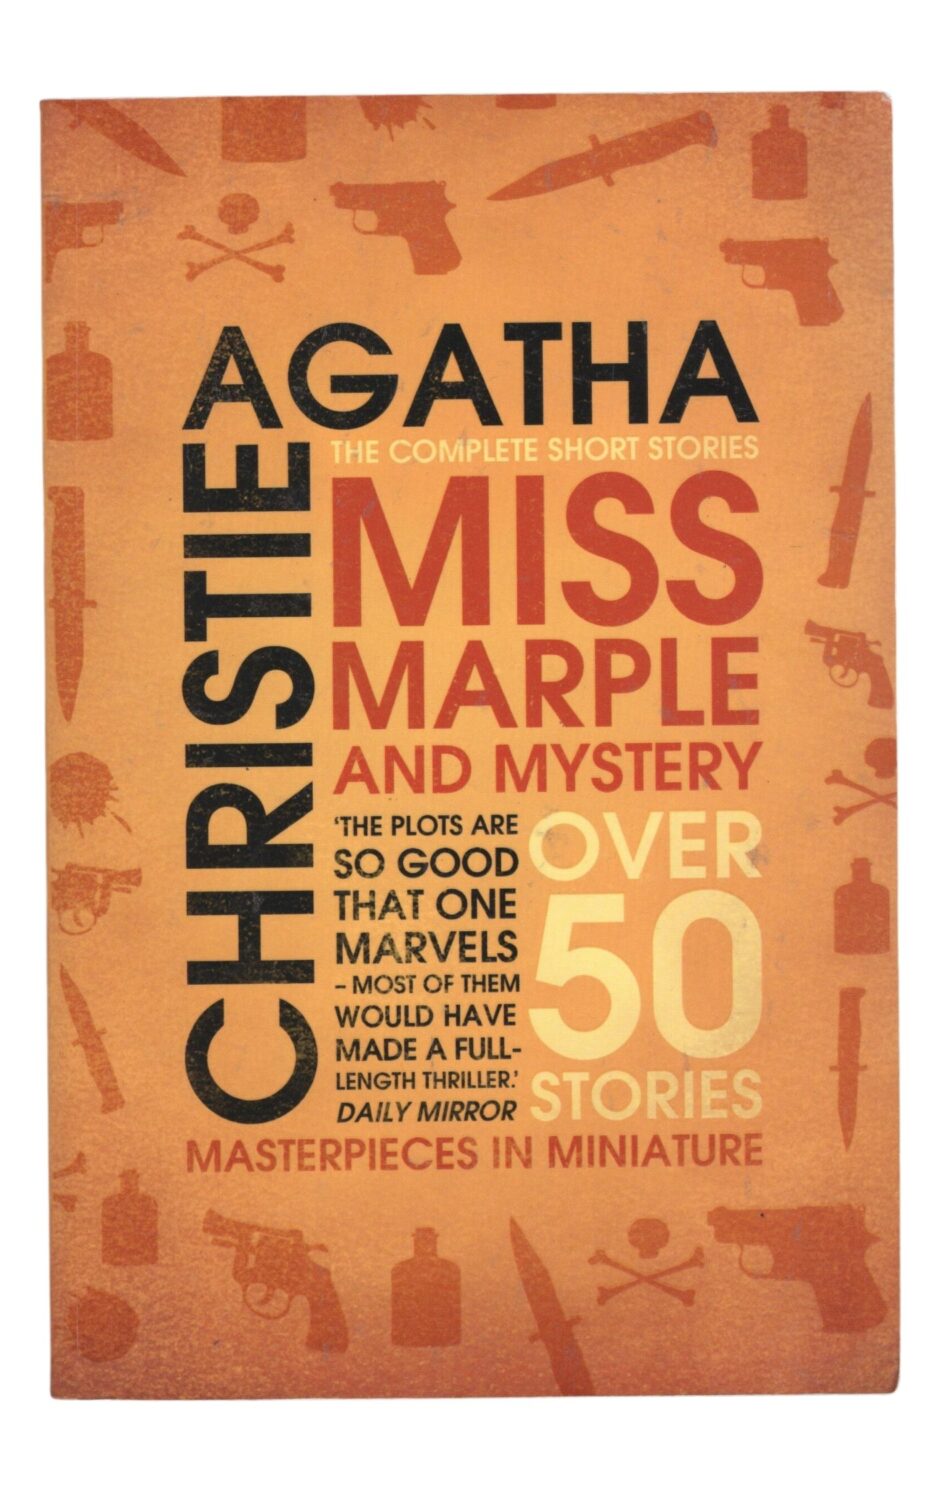 Agatha Christie - Miss Marple and Mystery. The Complete Short Stories